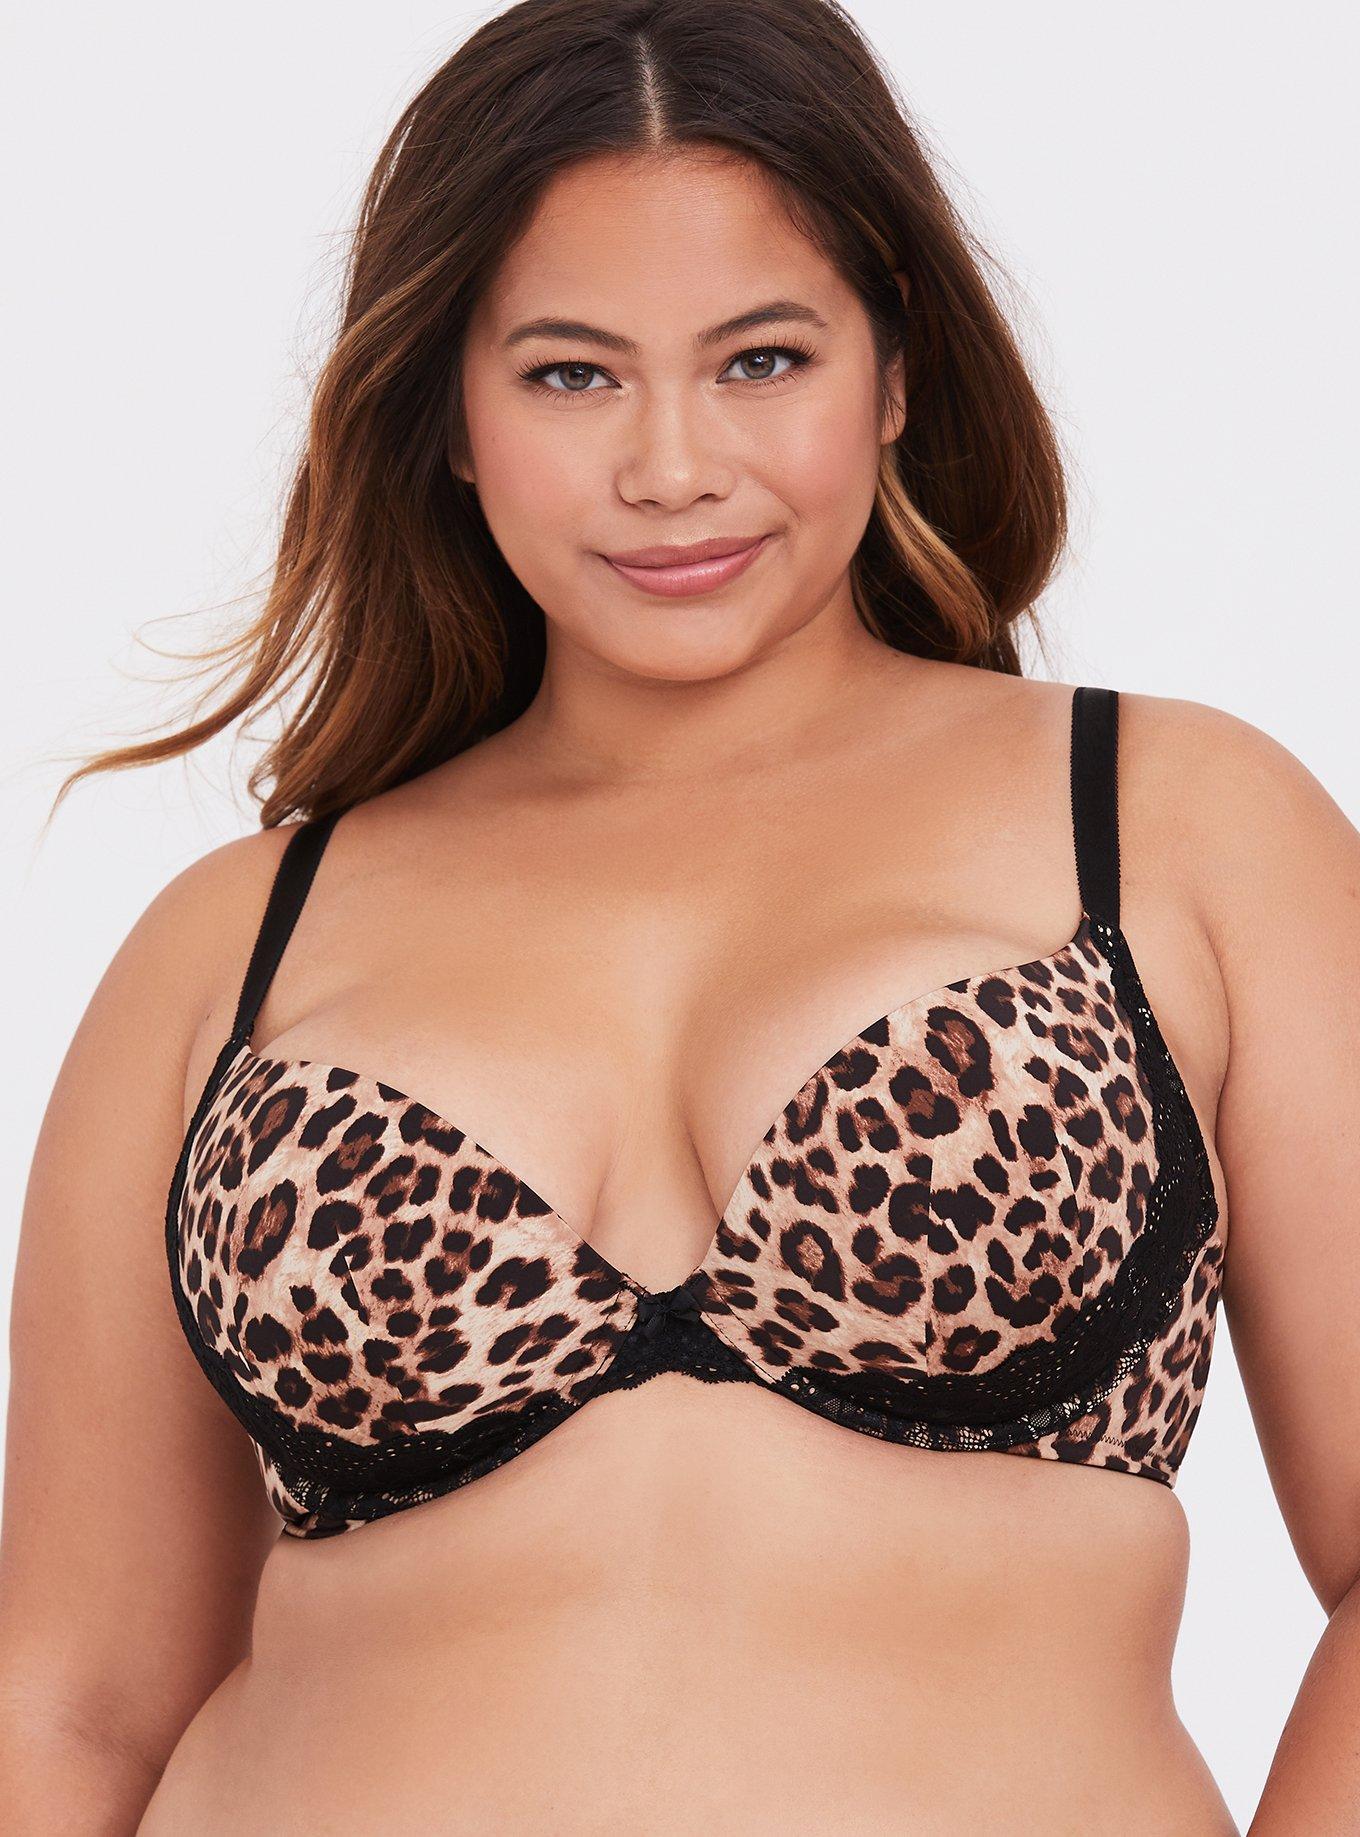 Torrid 46 DD PUSH-UP WIRE-FREE BRA - LACE LEOPARD WITH 360° BACK SMOOTHING™  NWT